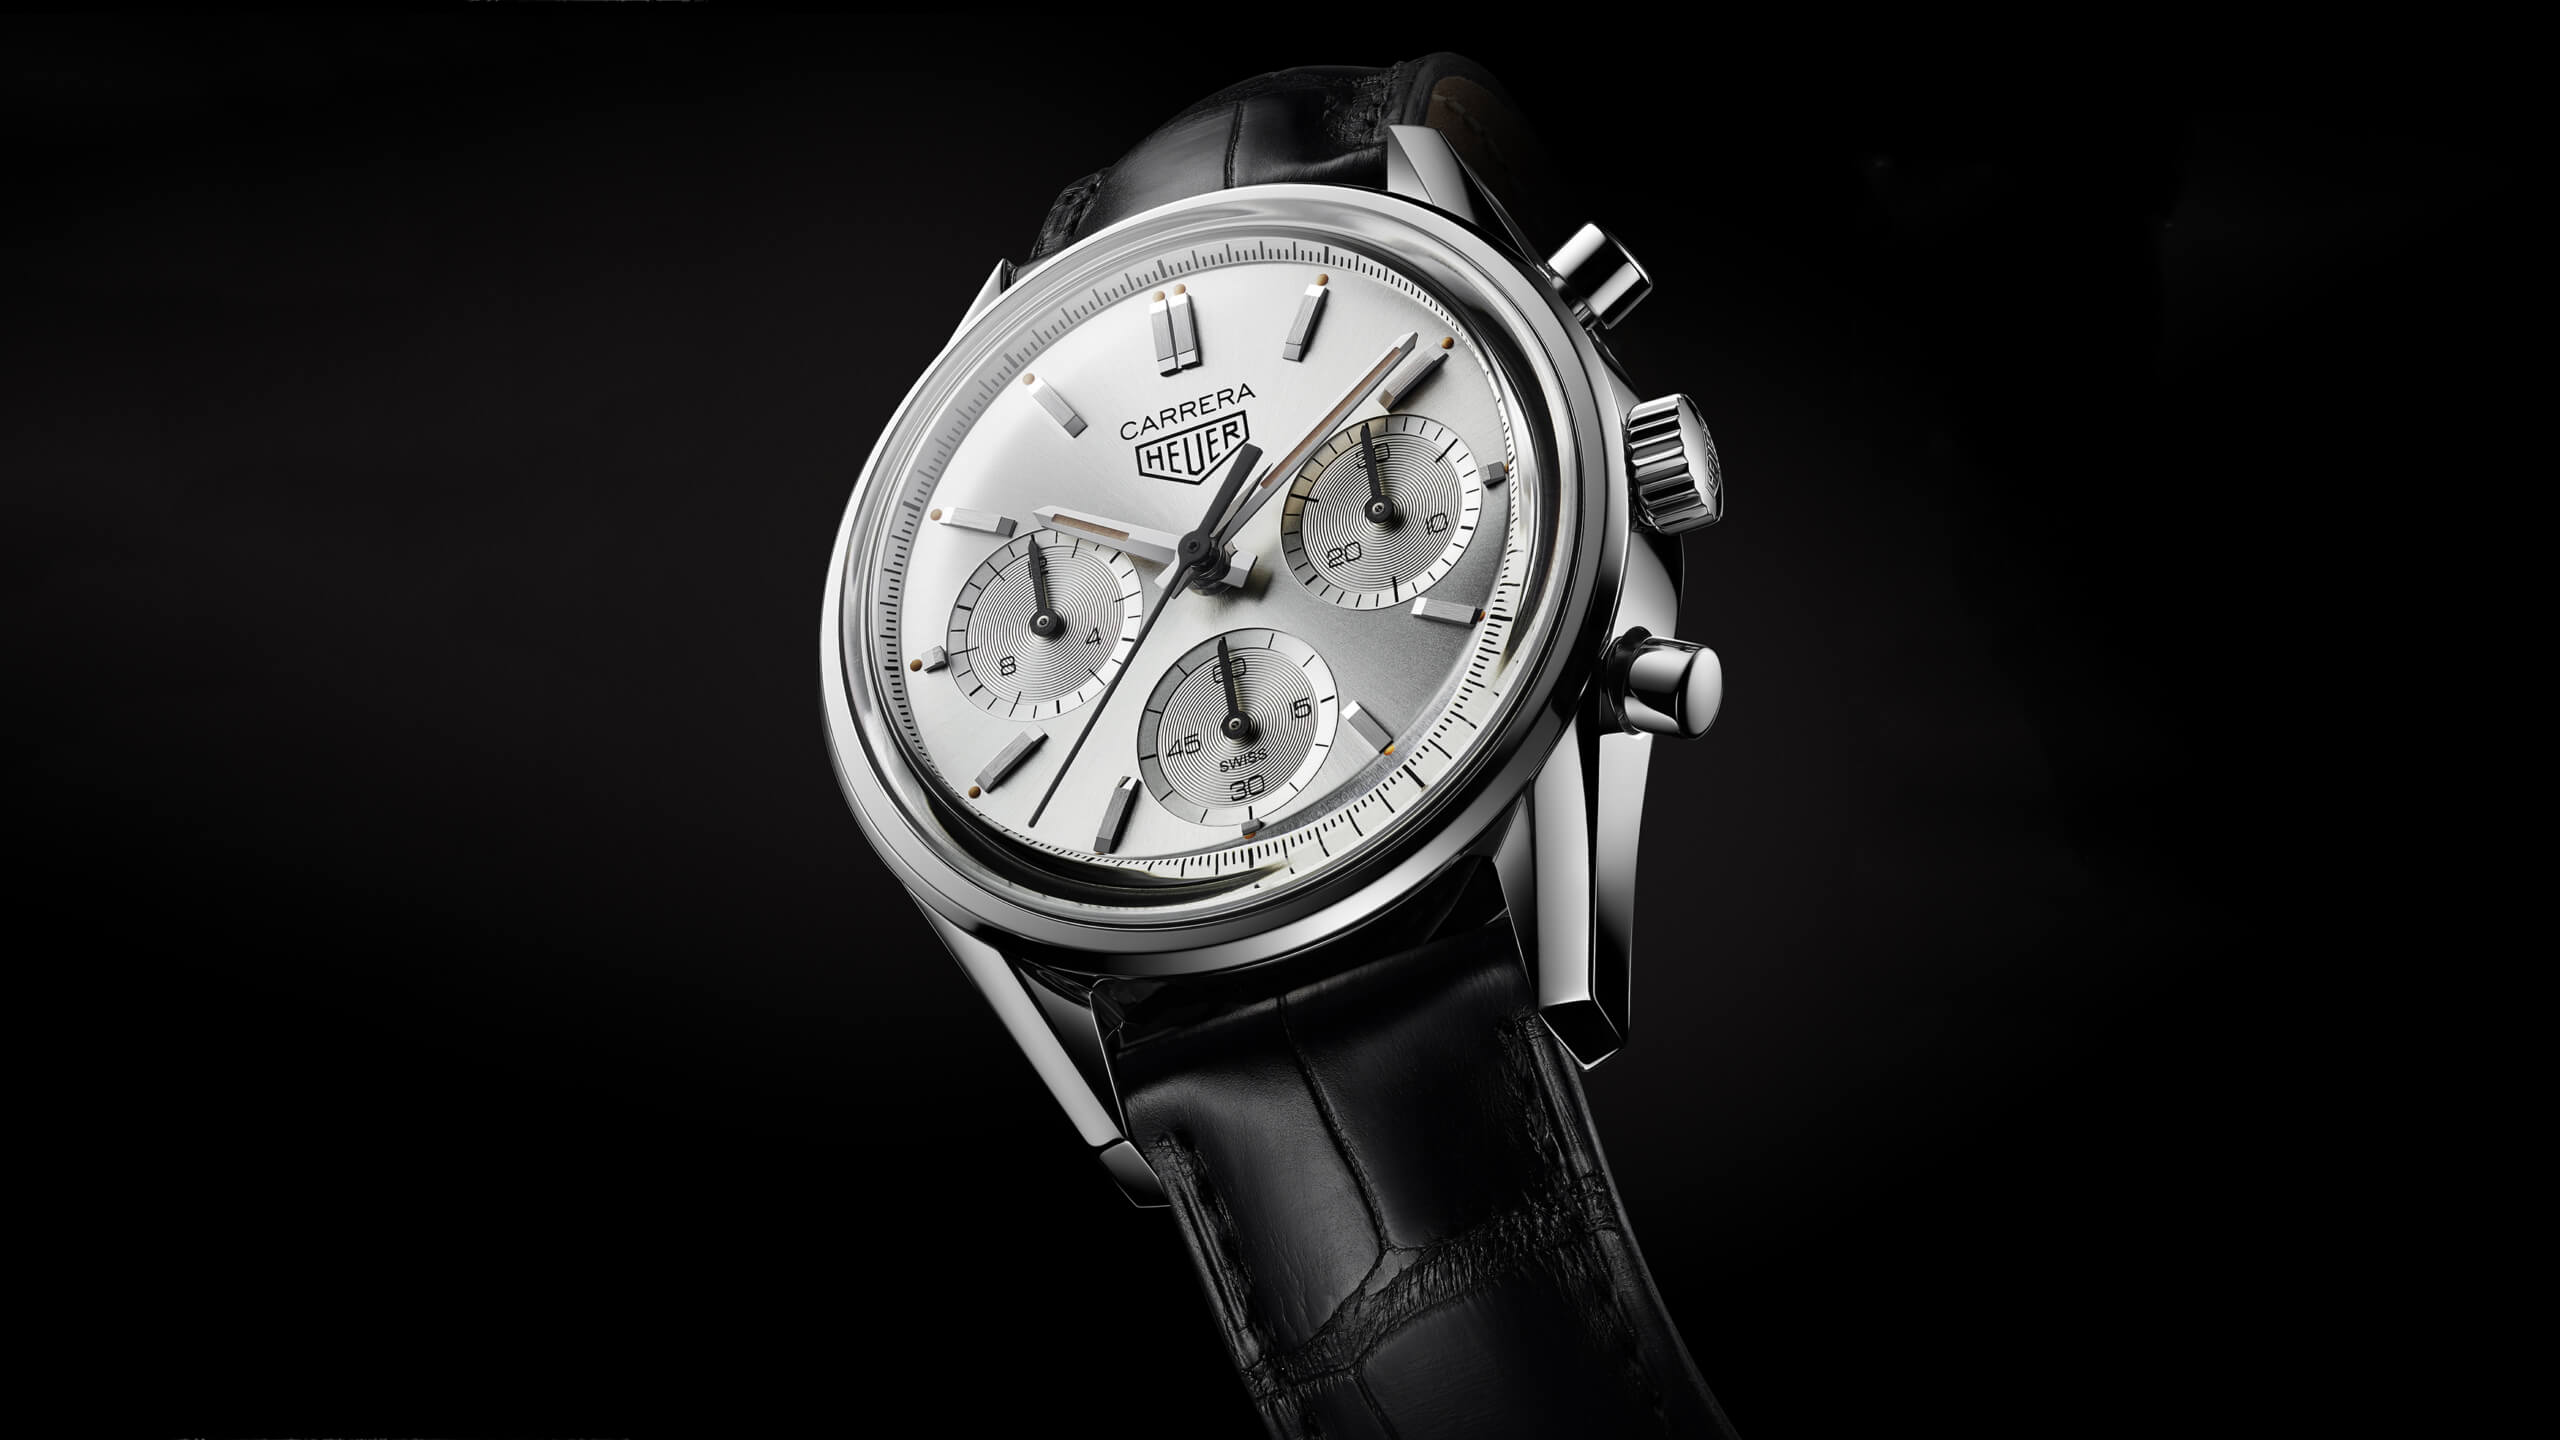 TAG Heuer Carrera timepiece. With a silver dial and a black leather strap.